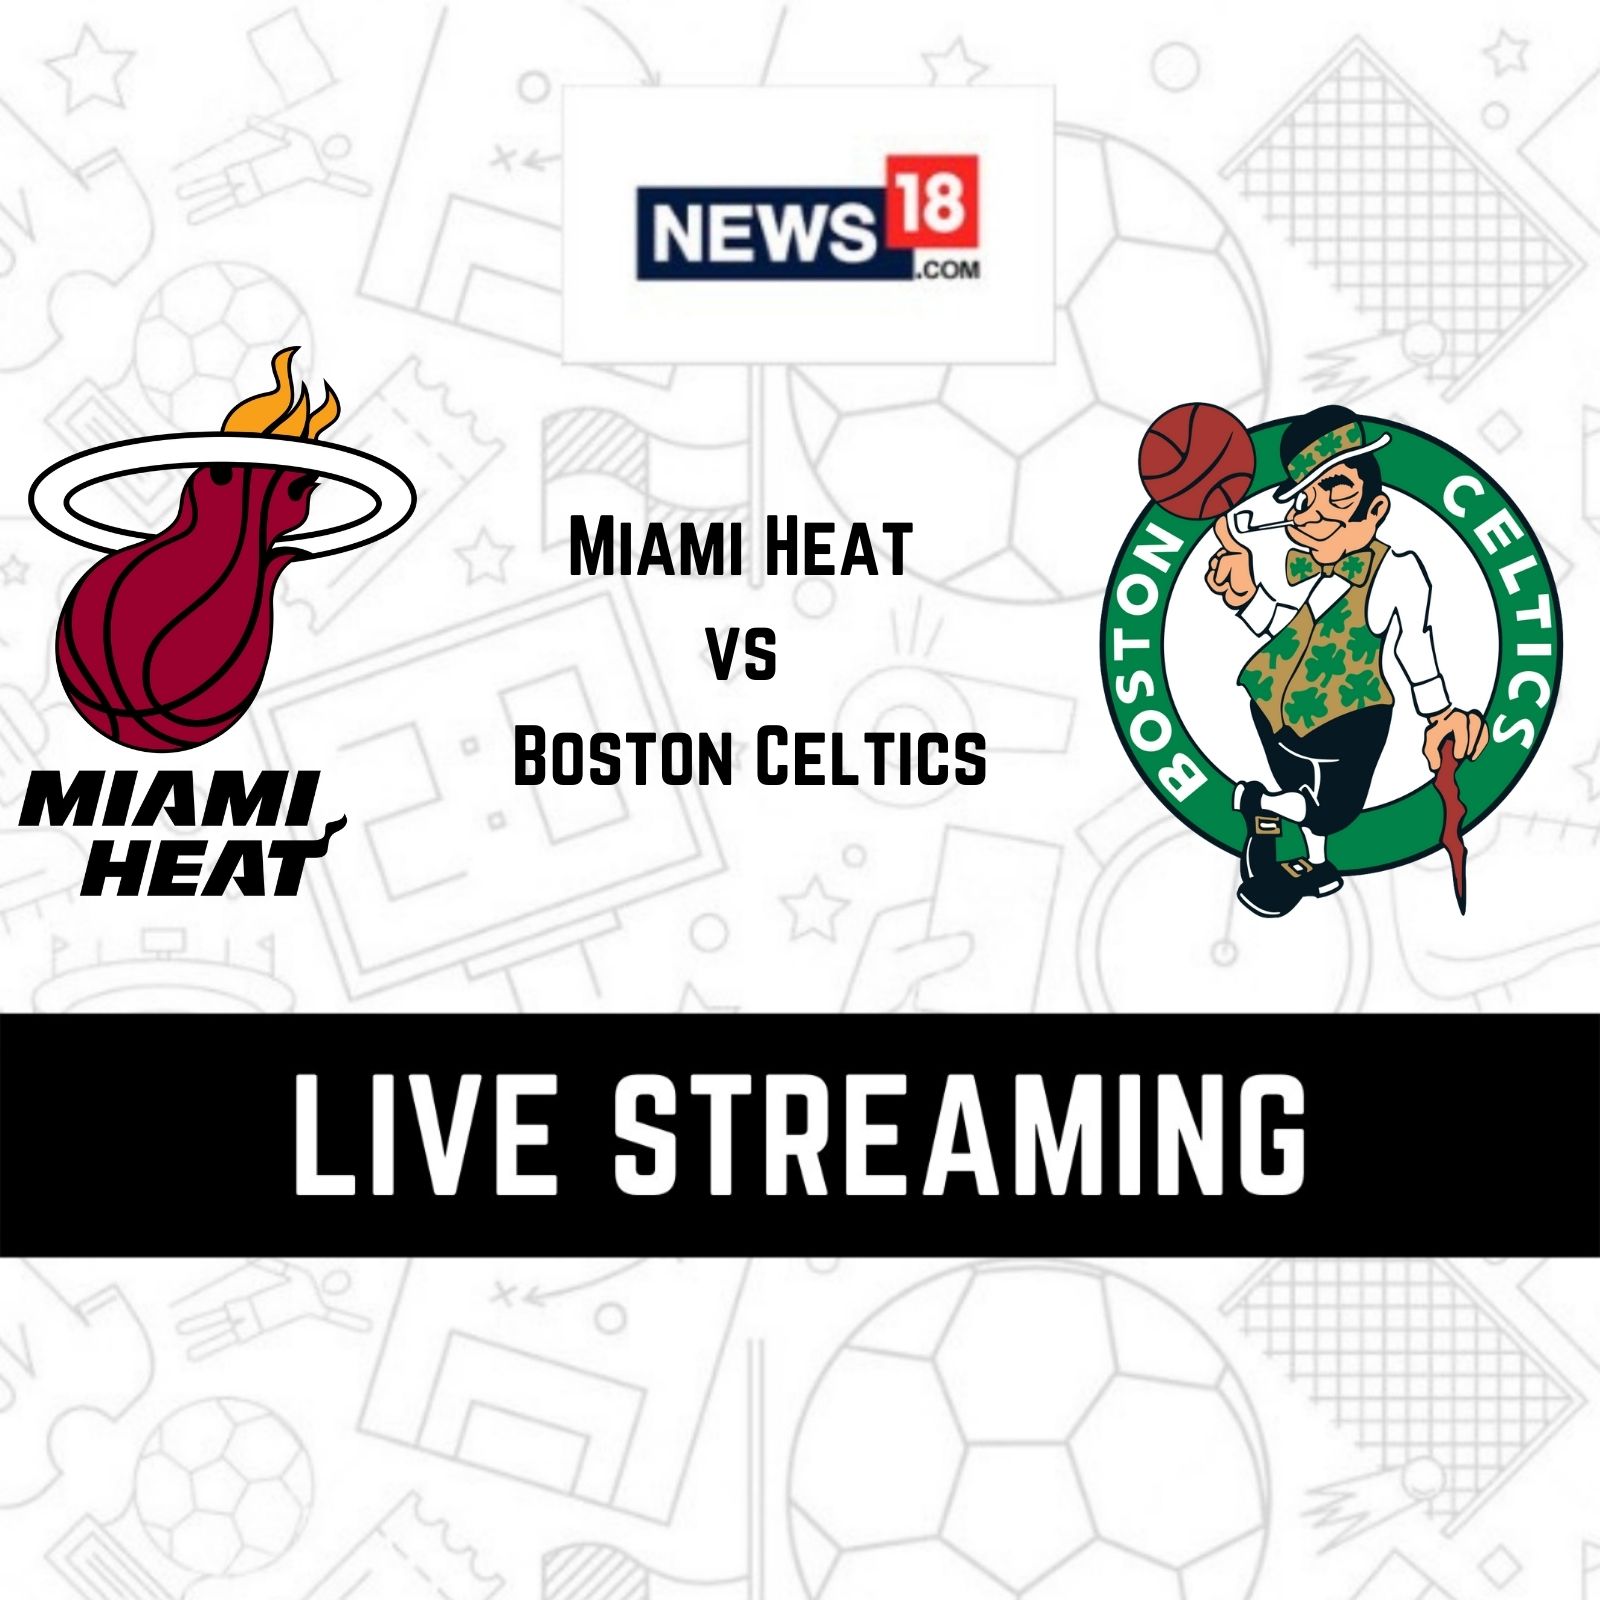 Boston Celtics vs Miami Heat Live Streaming When and Where to Watch NBA 2022 Conference Finals live Coverage on Live TV Online